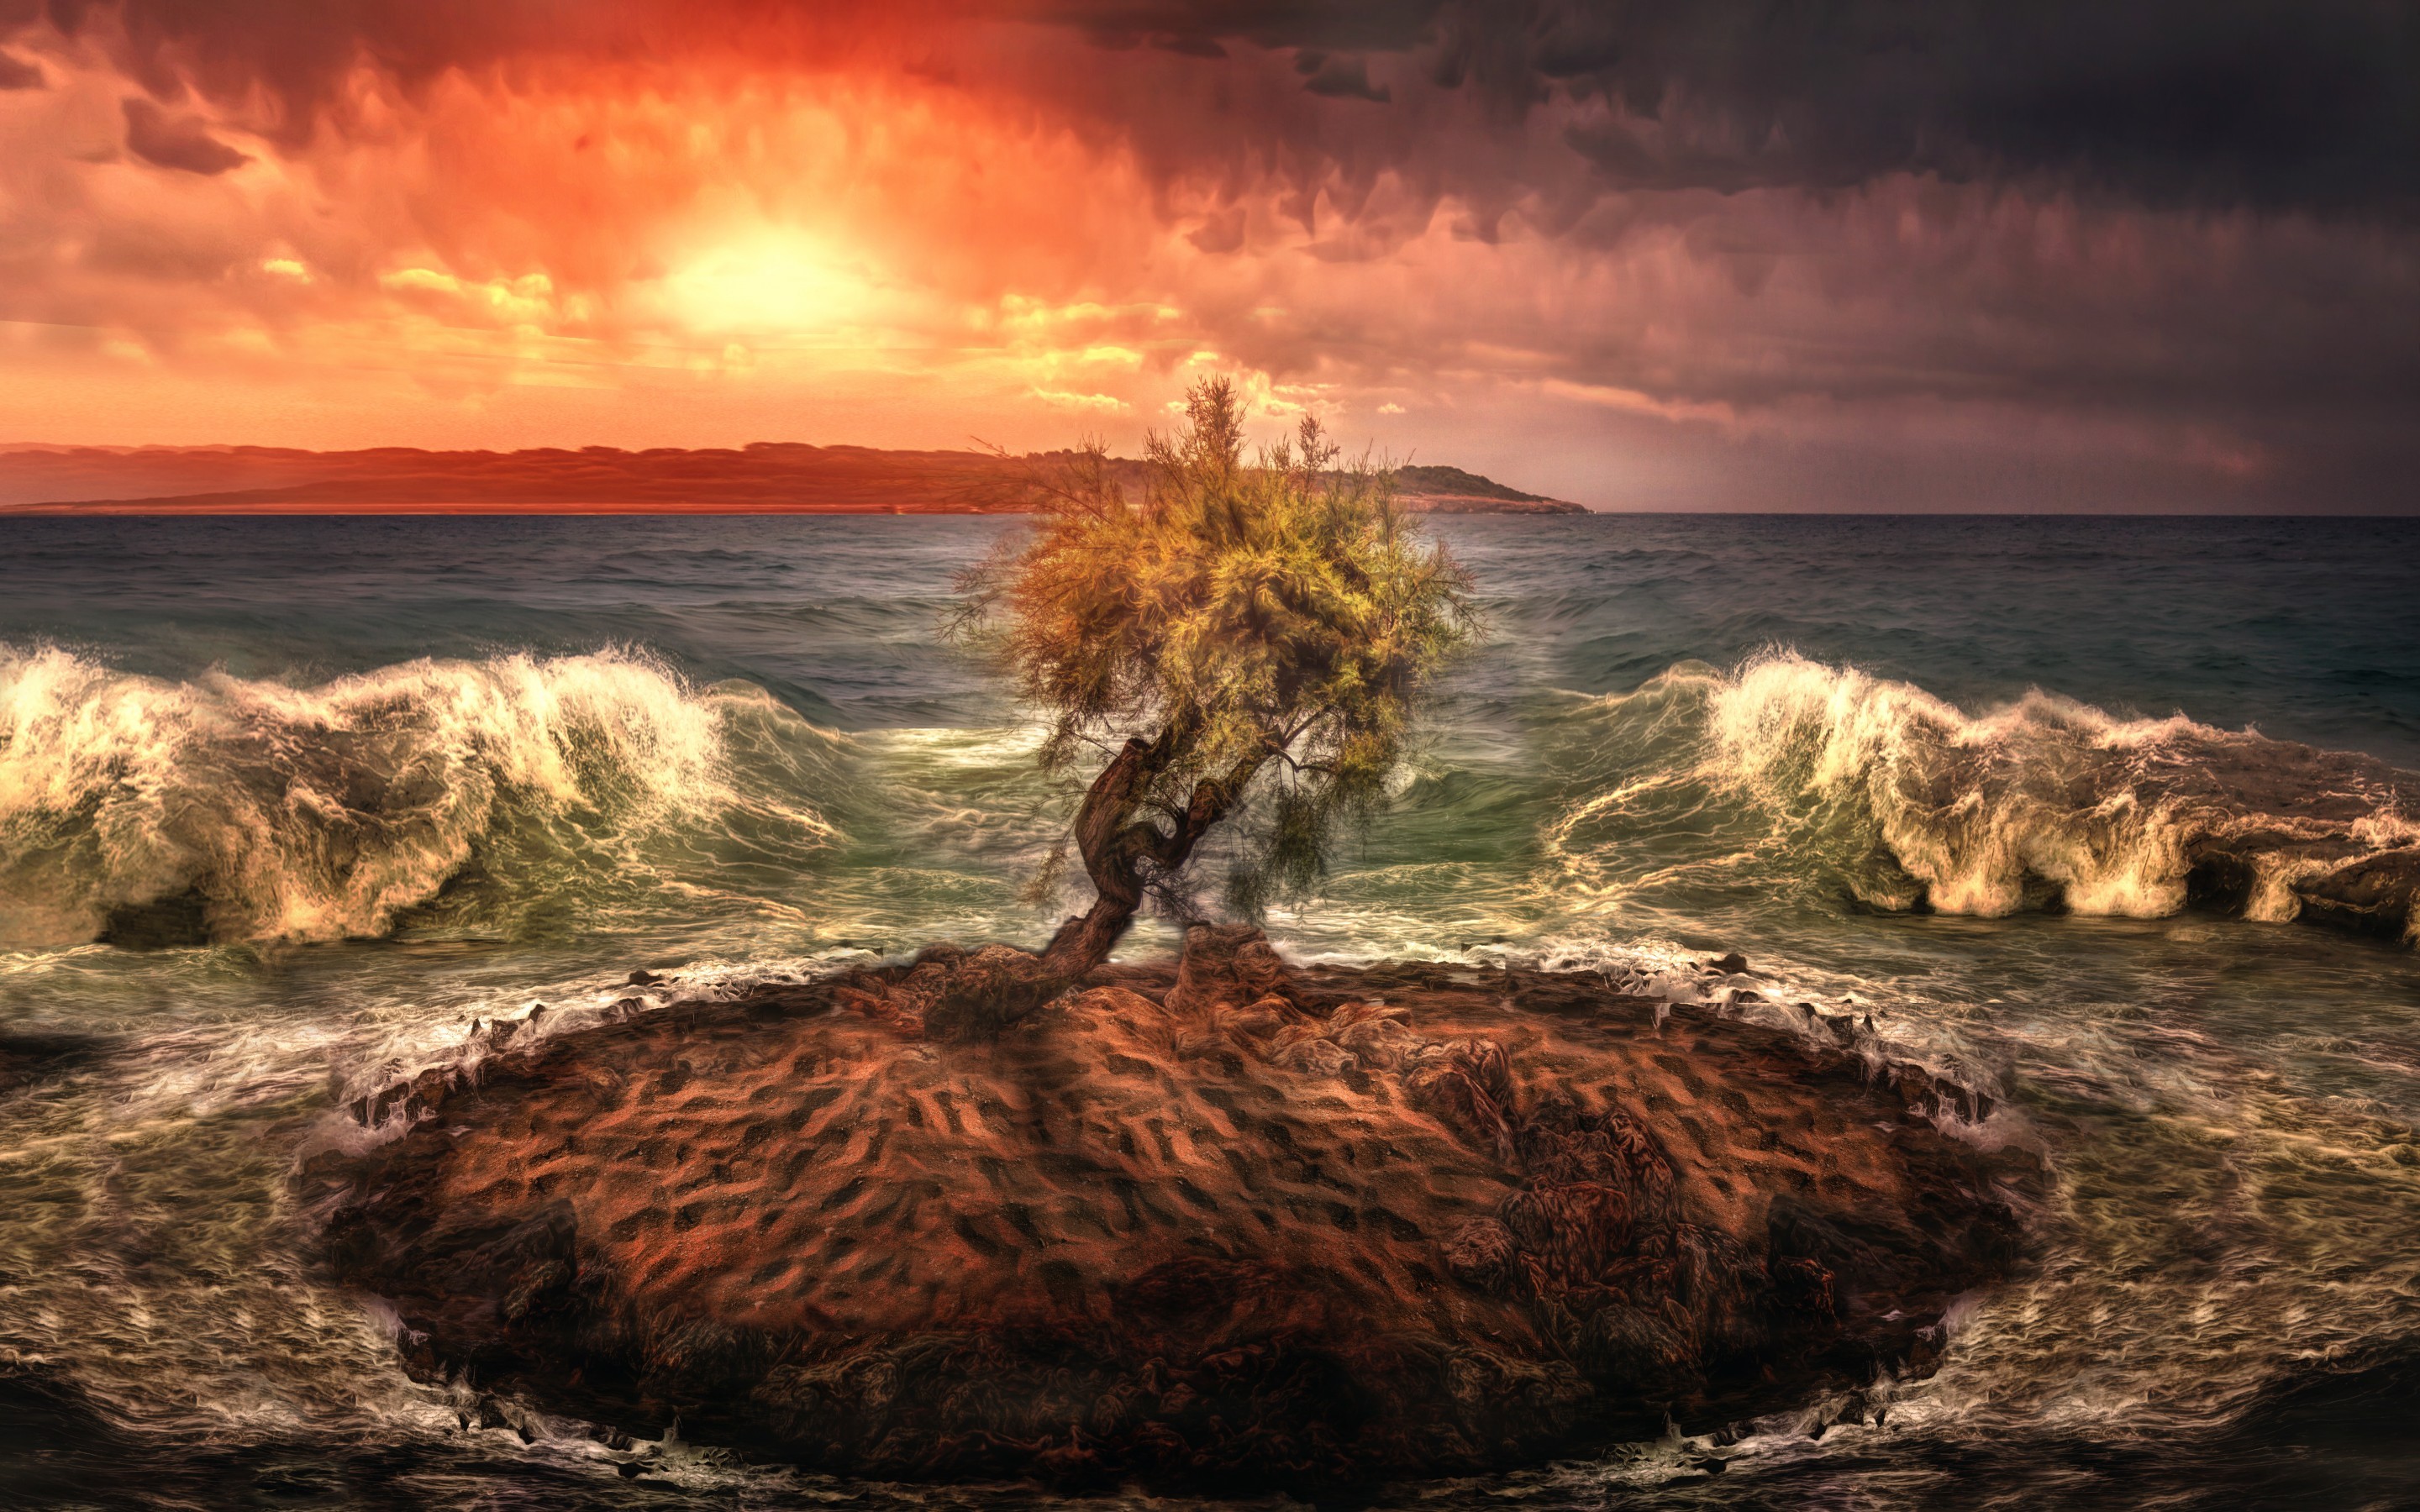 nature, Landscape, Sea, Waves, Coast, Photo manipulation, HDR, Island, Trees, Clouds, Sunset, Cliff, Sand Wallpaper